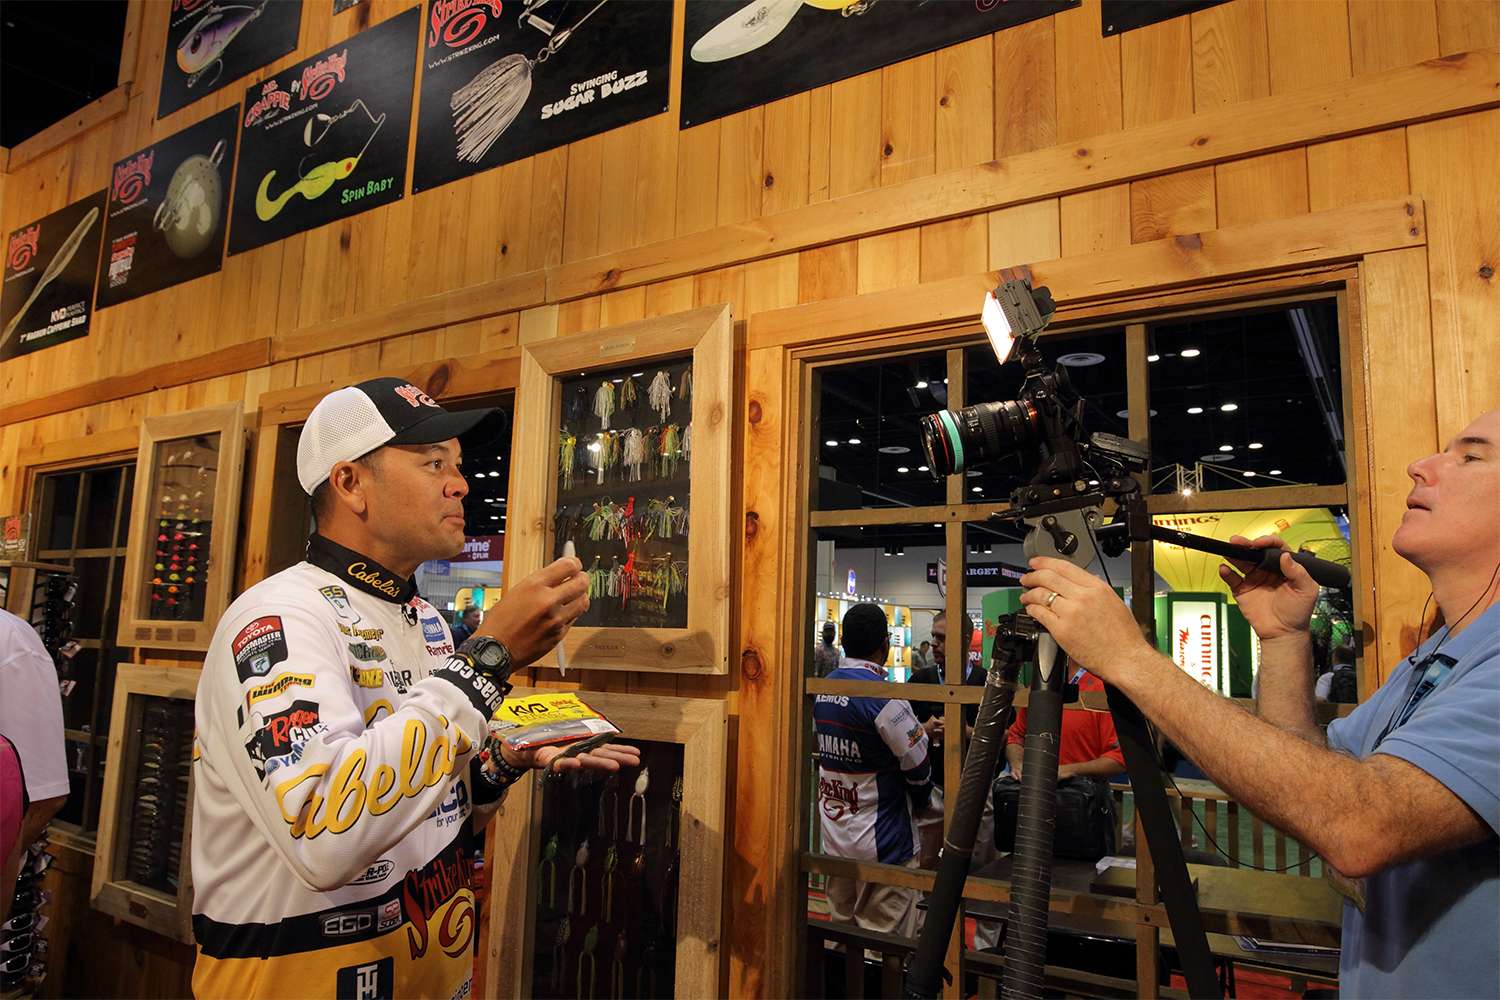 James Niggemeyer films at a busy Strike King booth.